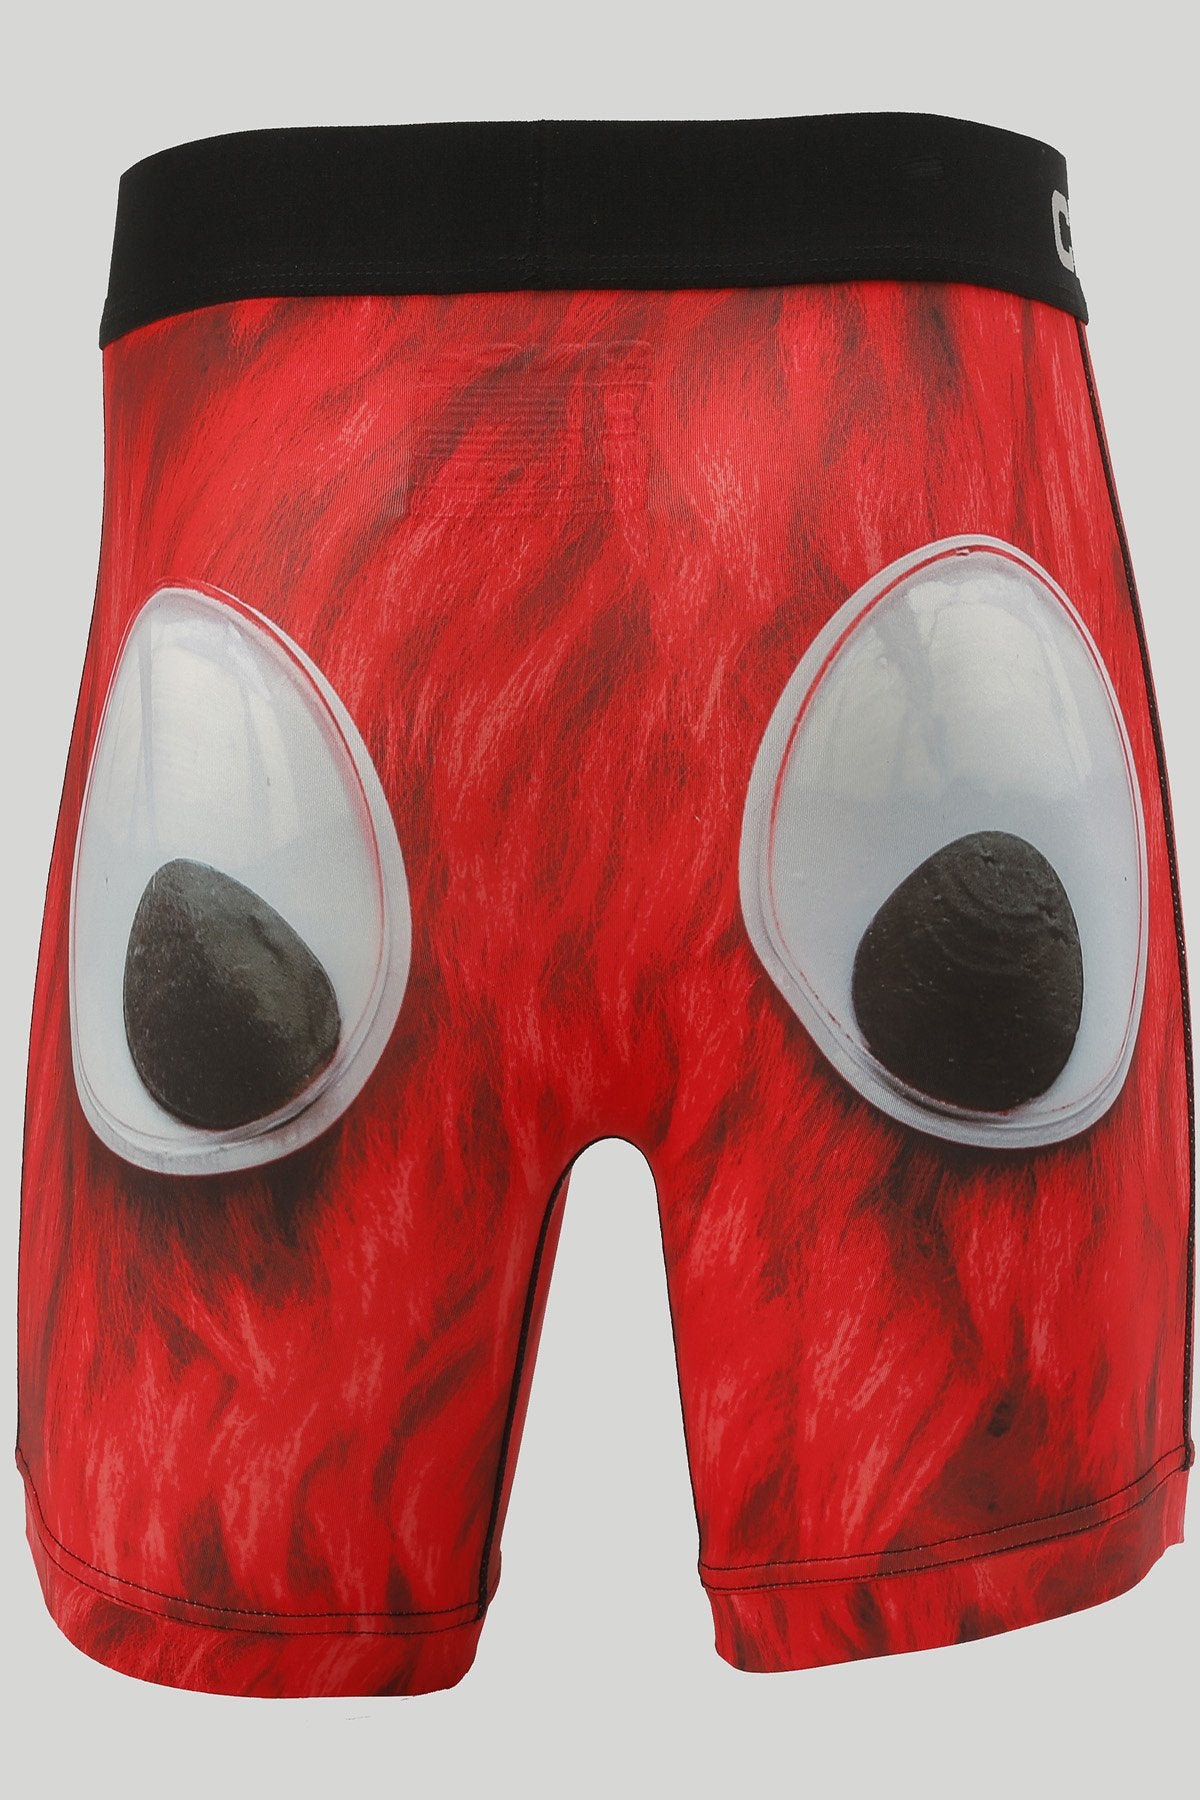 The Cinch Red Monster Boxer Brief